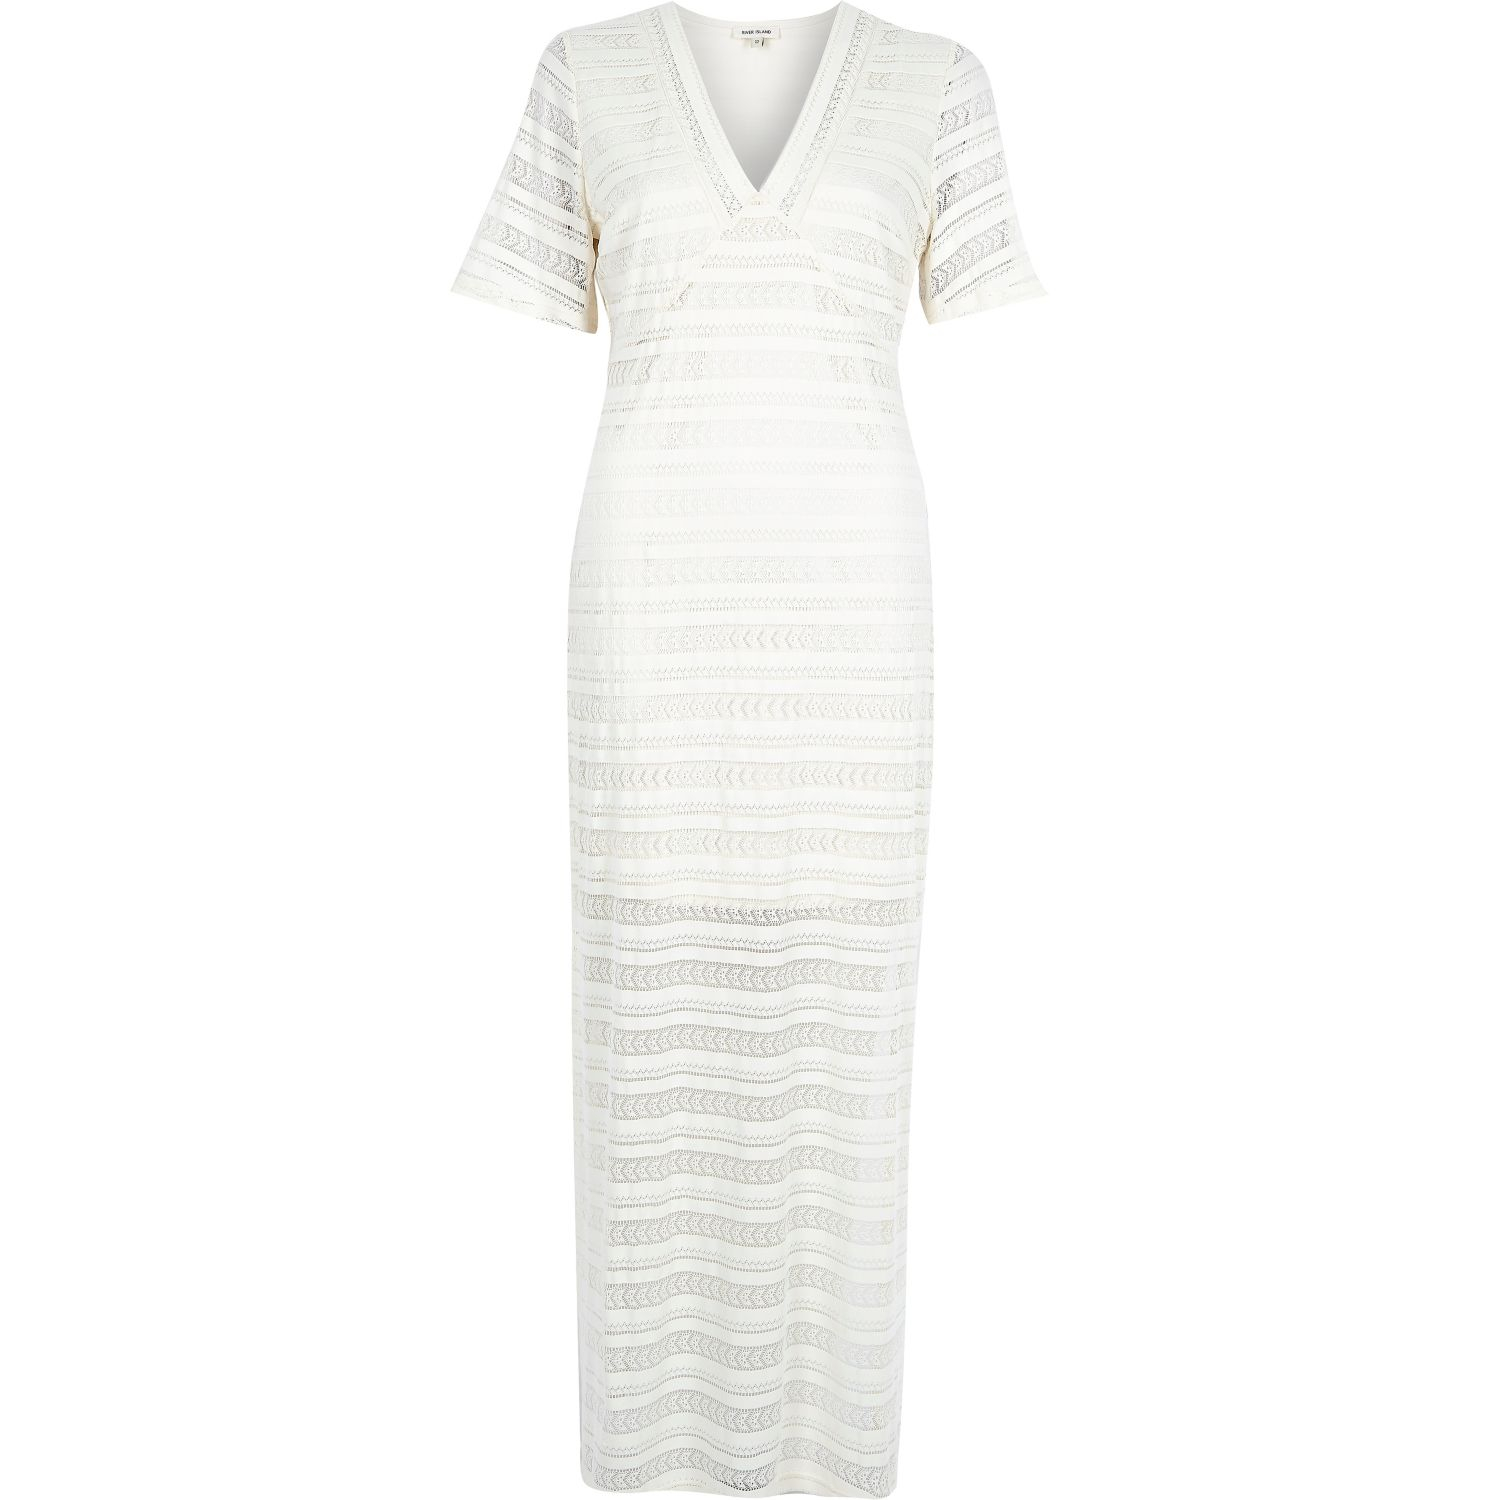 River island White Lace Panel Embroidered Maxi Shirt Dress in ...